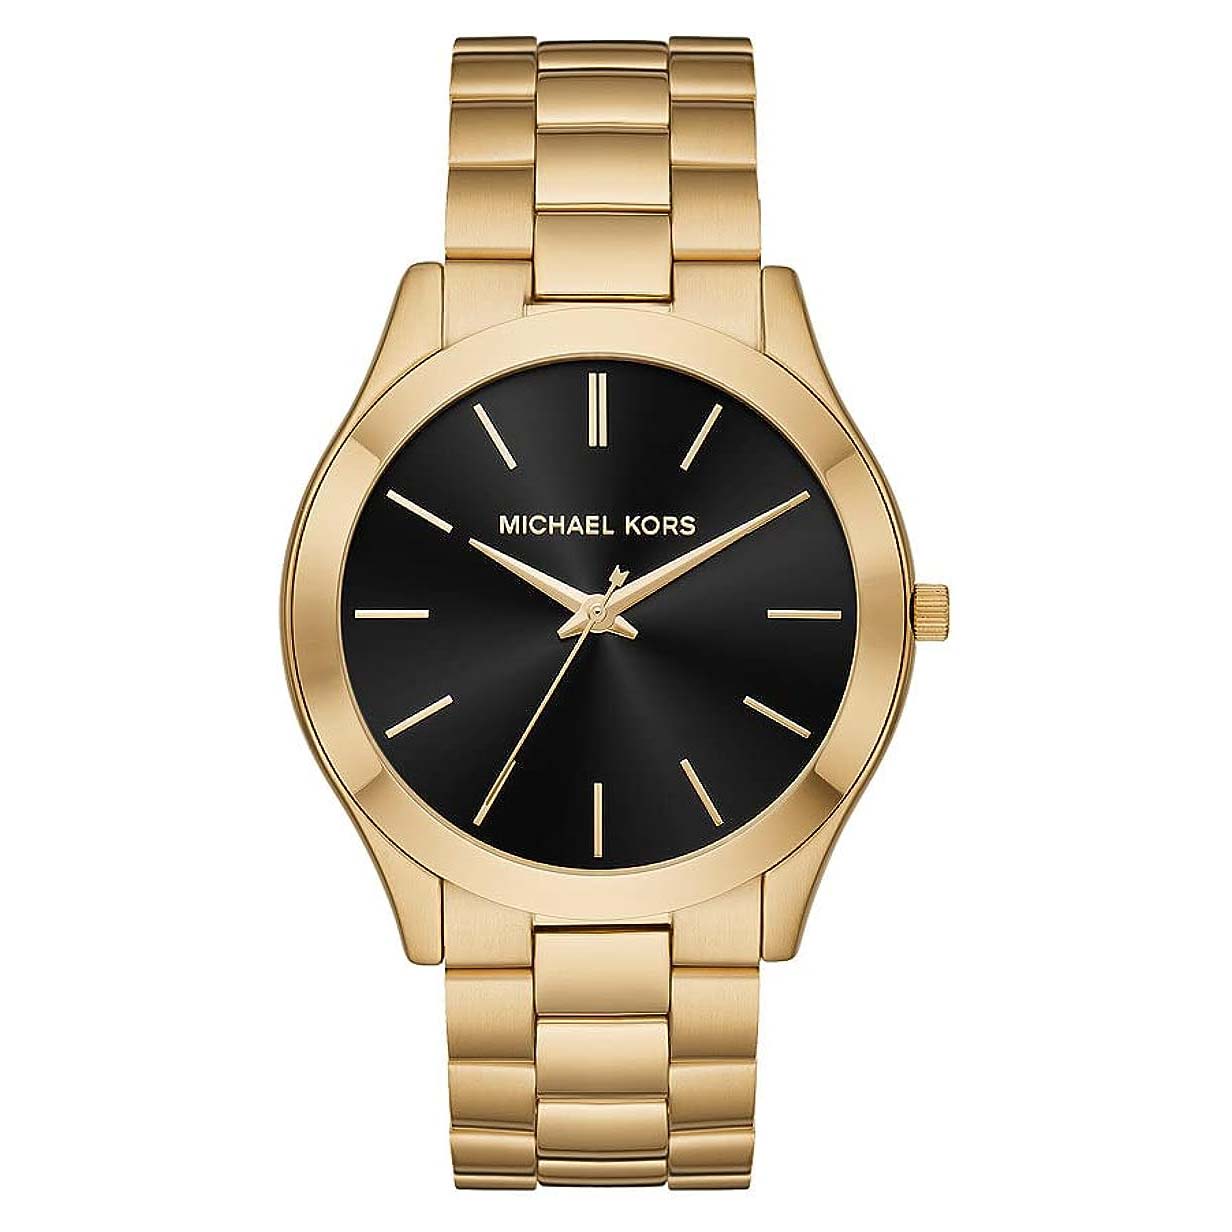 Gold stainless steel watch with black dial